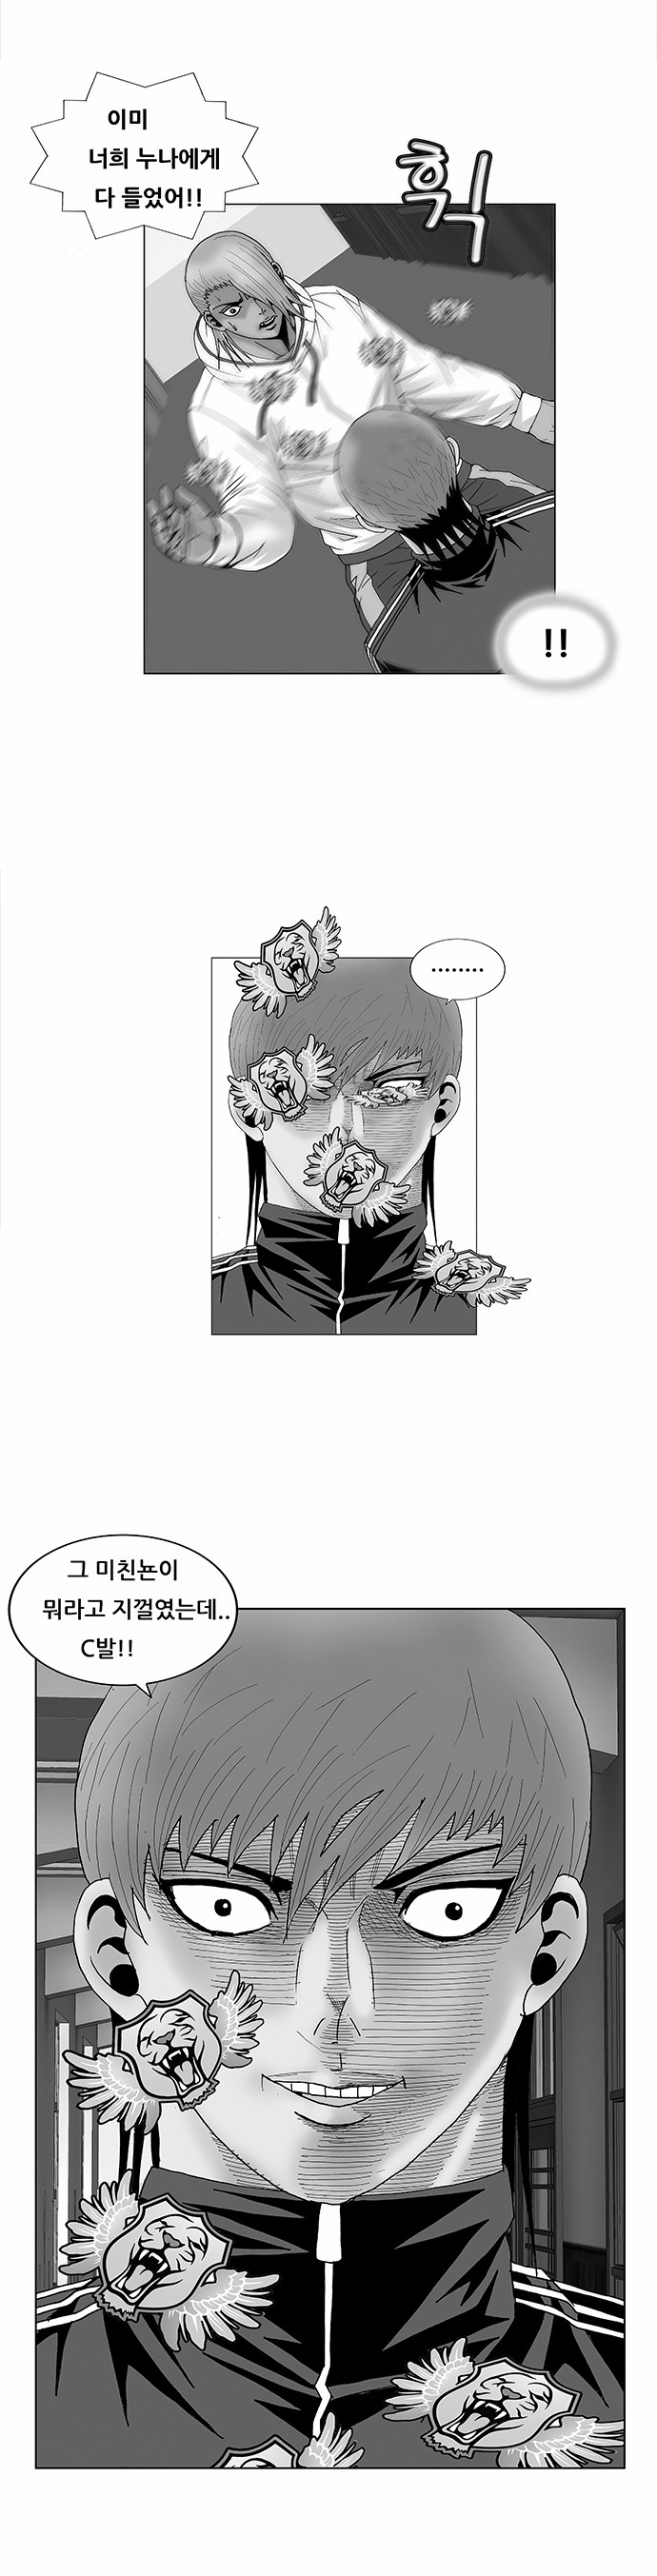 Ultimate Legend - Kang Hae Hyo - Chapter 76 - Page 1